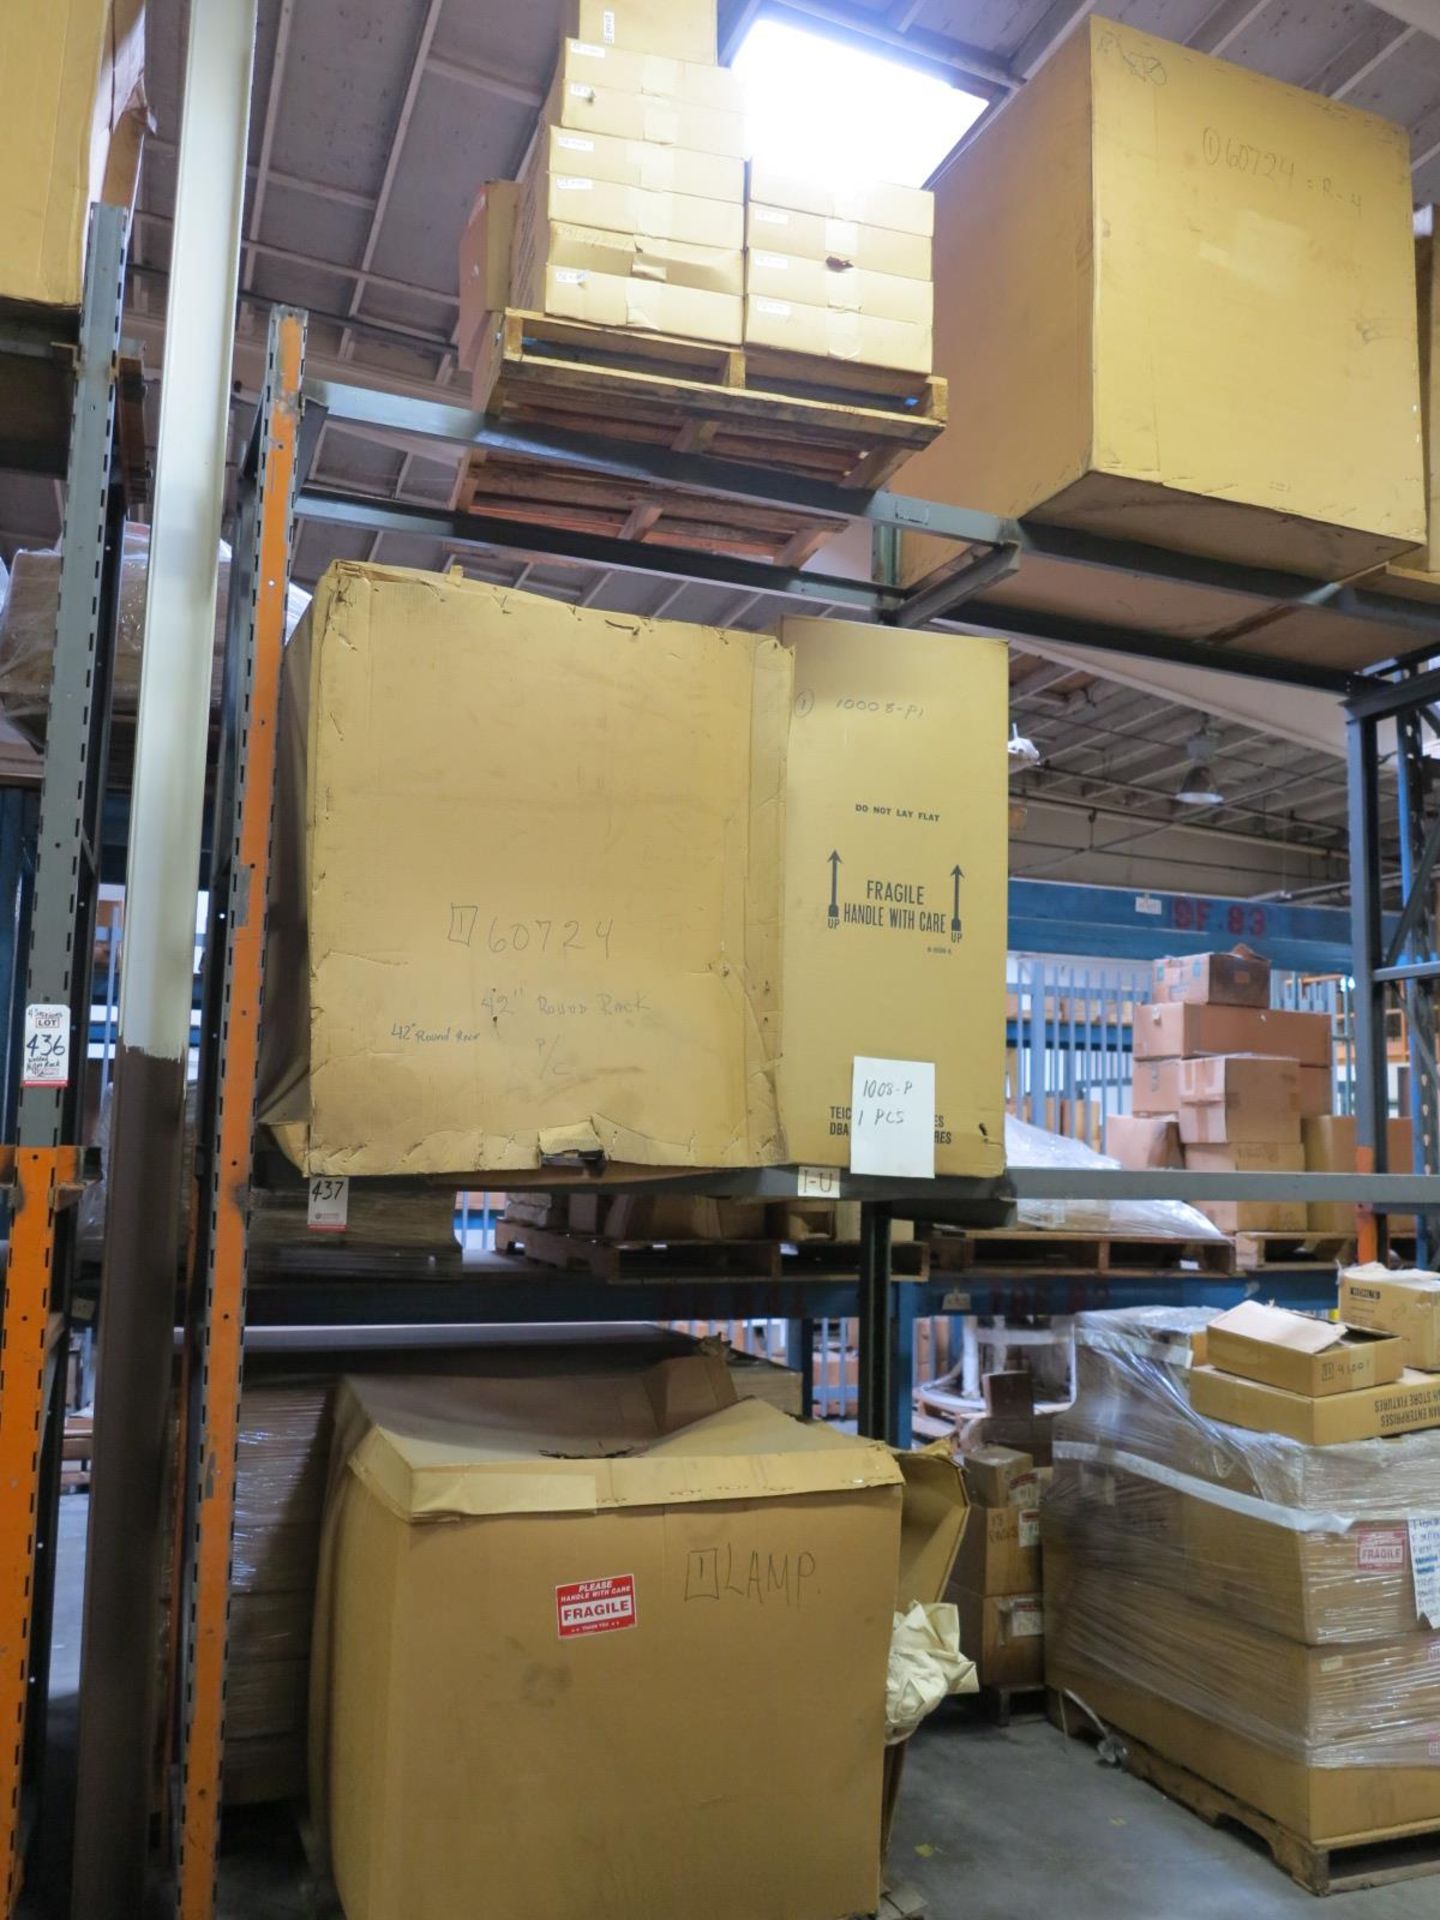 LOT - CONTENTS OF (2) SECTIONS OF PALLET RACK TO INCLUDE: GLASS SHELVES; ITEM # 60724, RACK RND. 42"